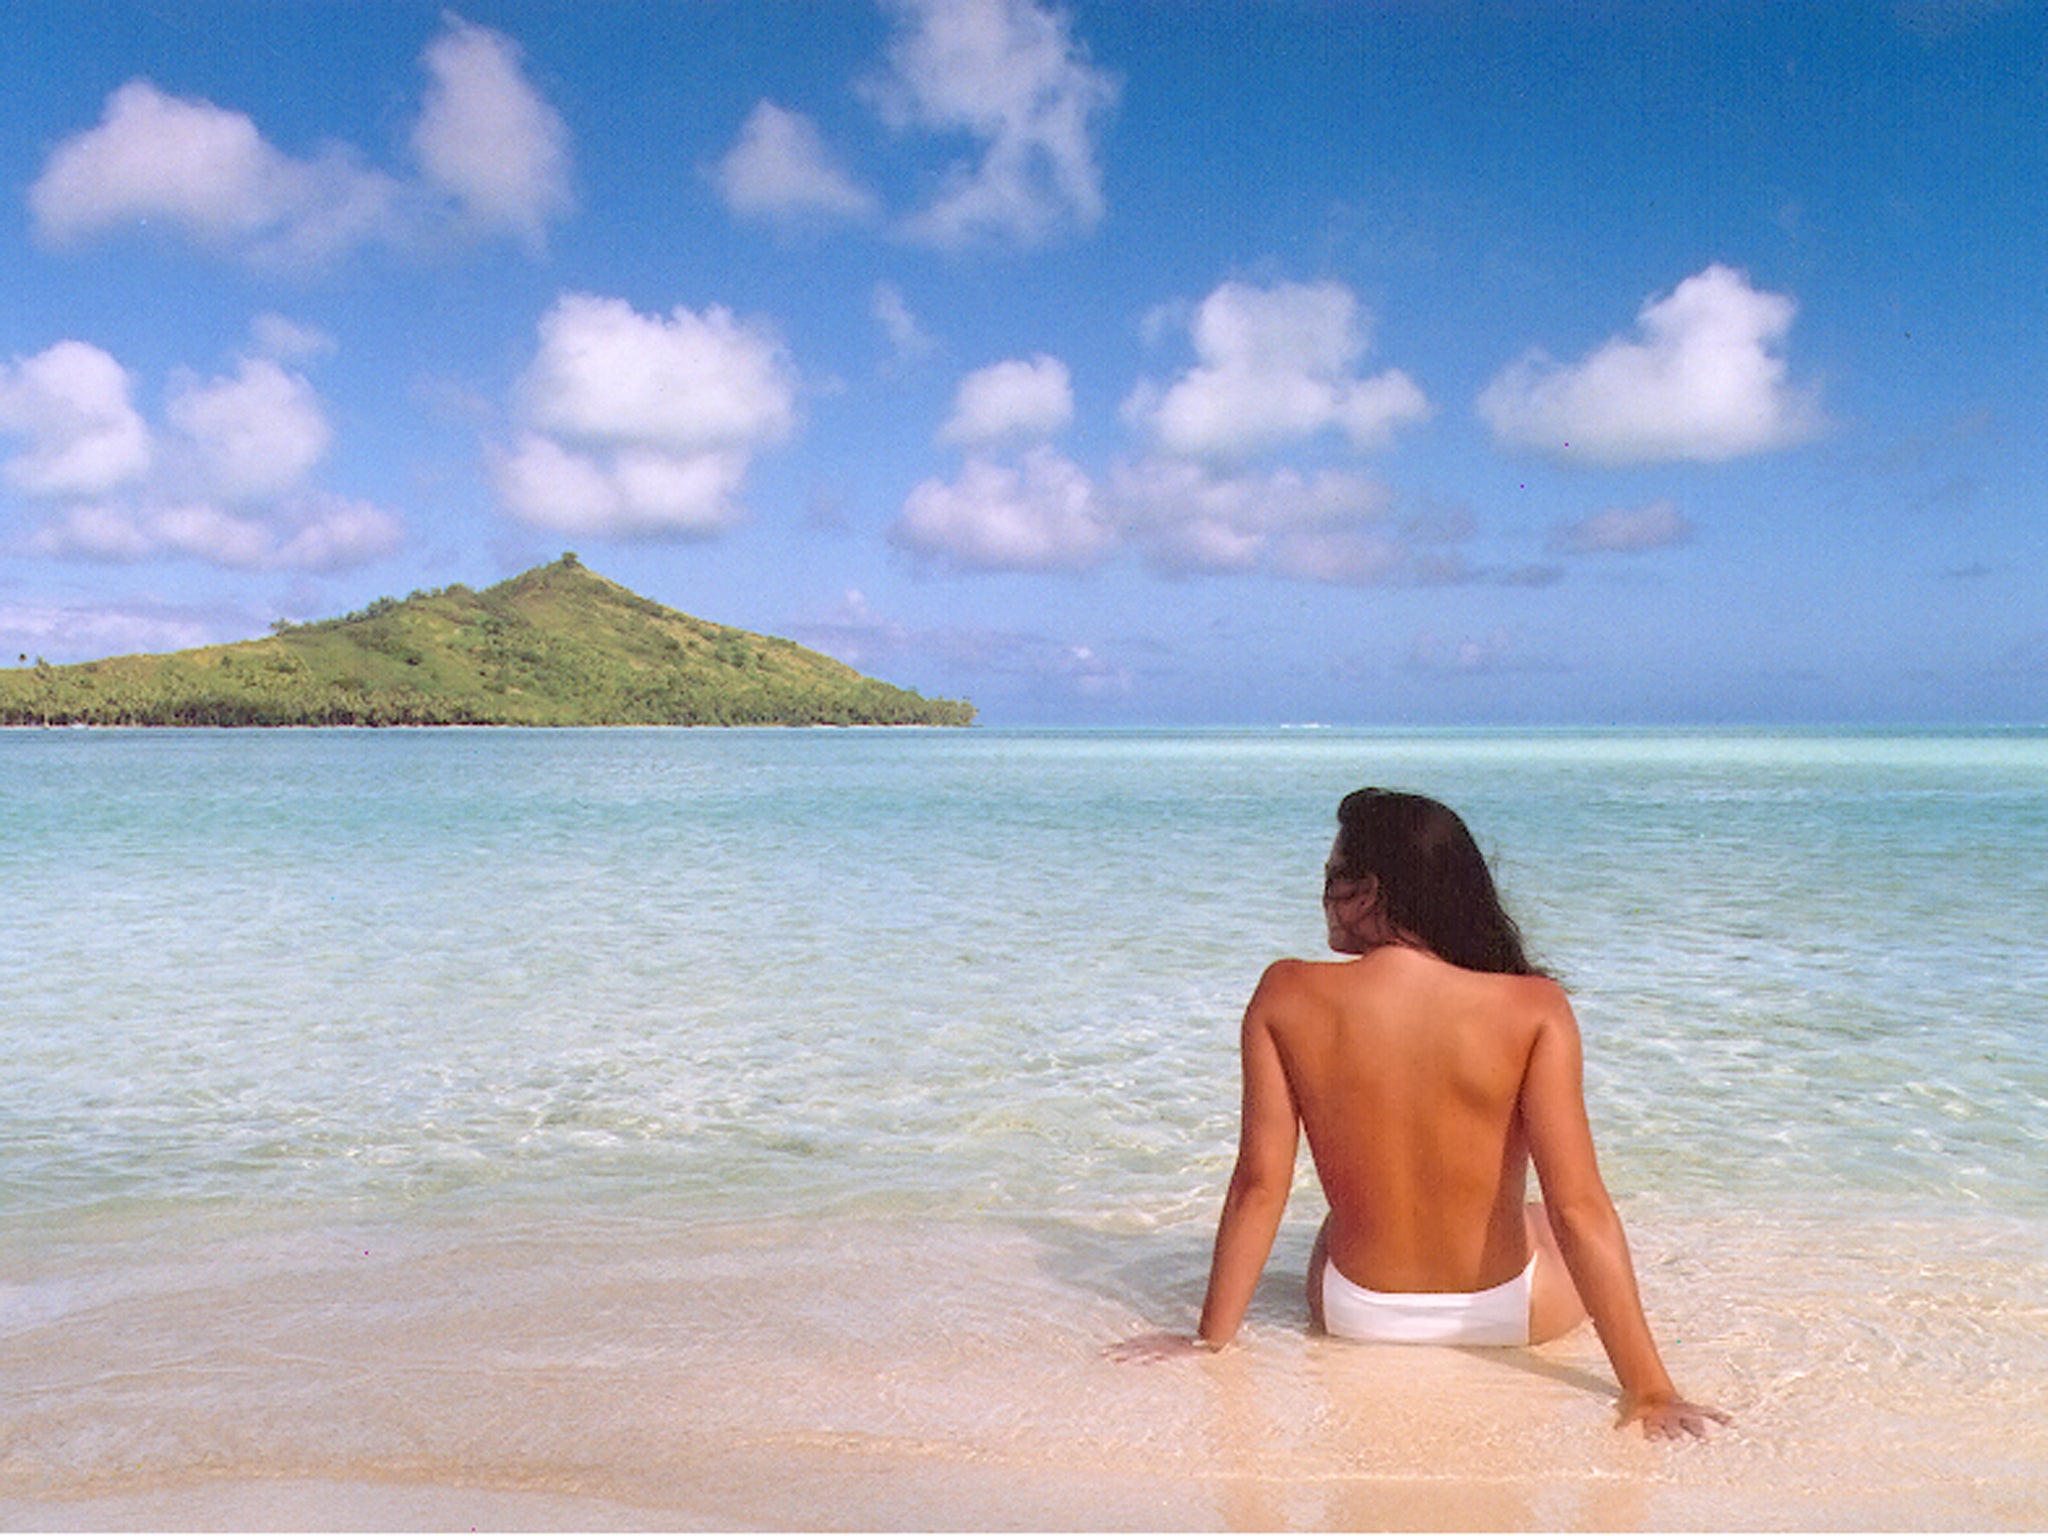 'Jennifer in Paradise': the first ever image to be edited in Photoshop. It shows Thomas Knoll's then-girlfriend and now wife, in Bora Bora, and was taken in August 1988